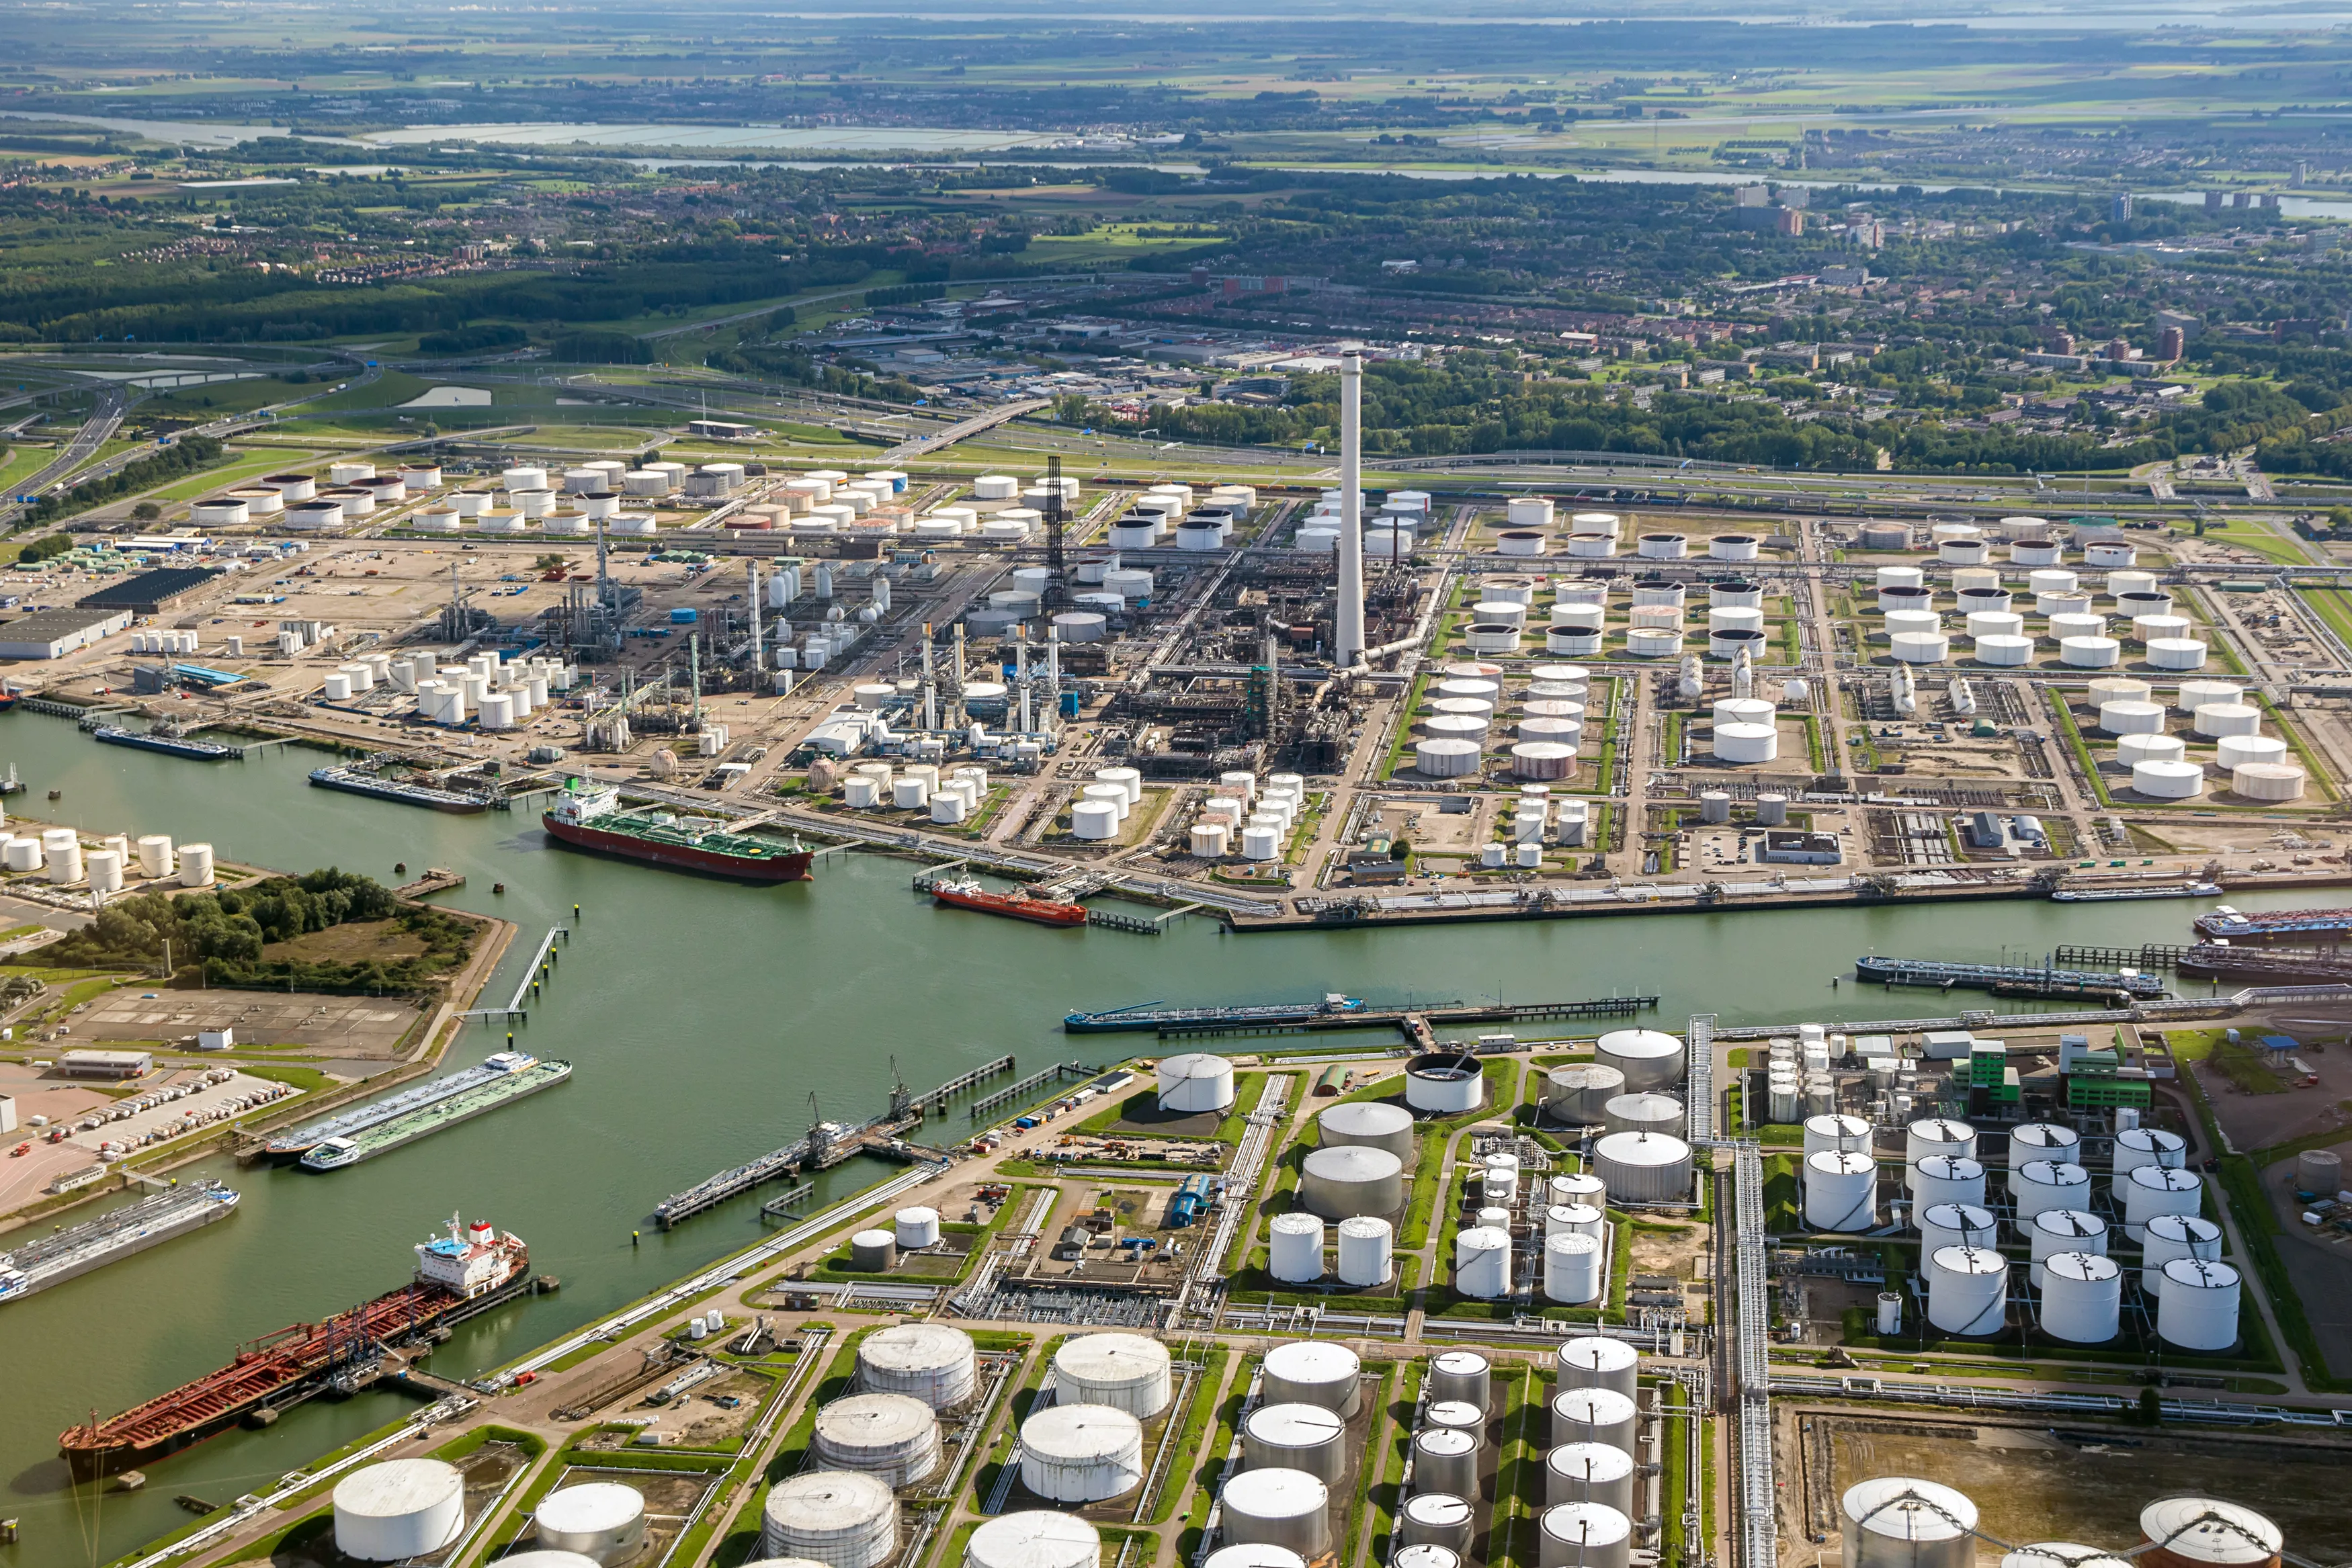 Aerial view of oil tankers moored at a oil storage terminal and oil refinery in a port.